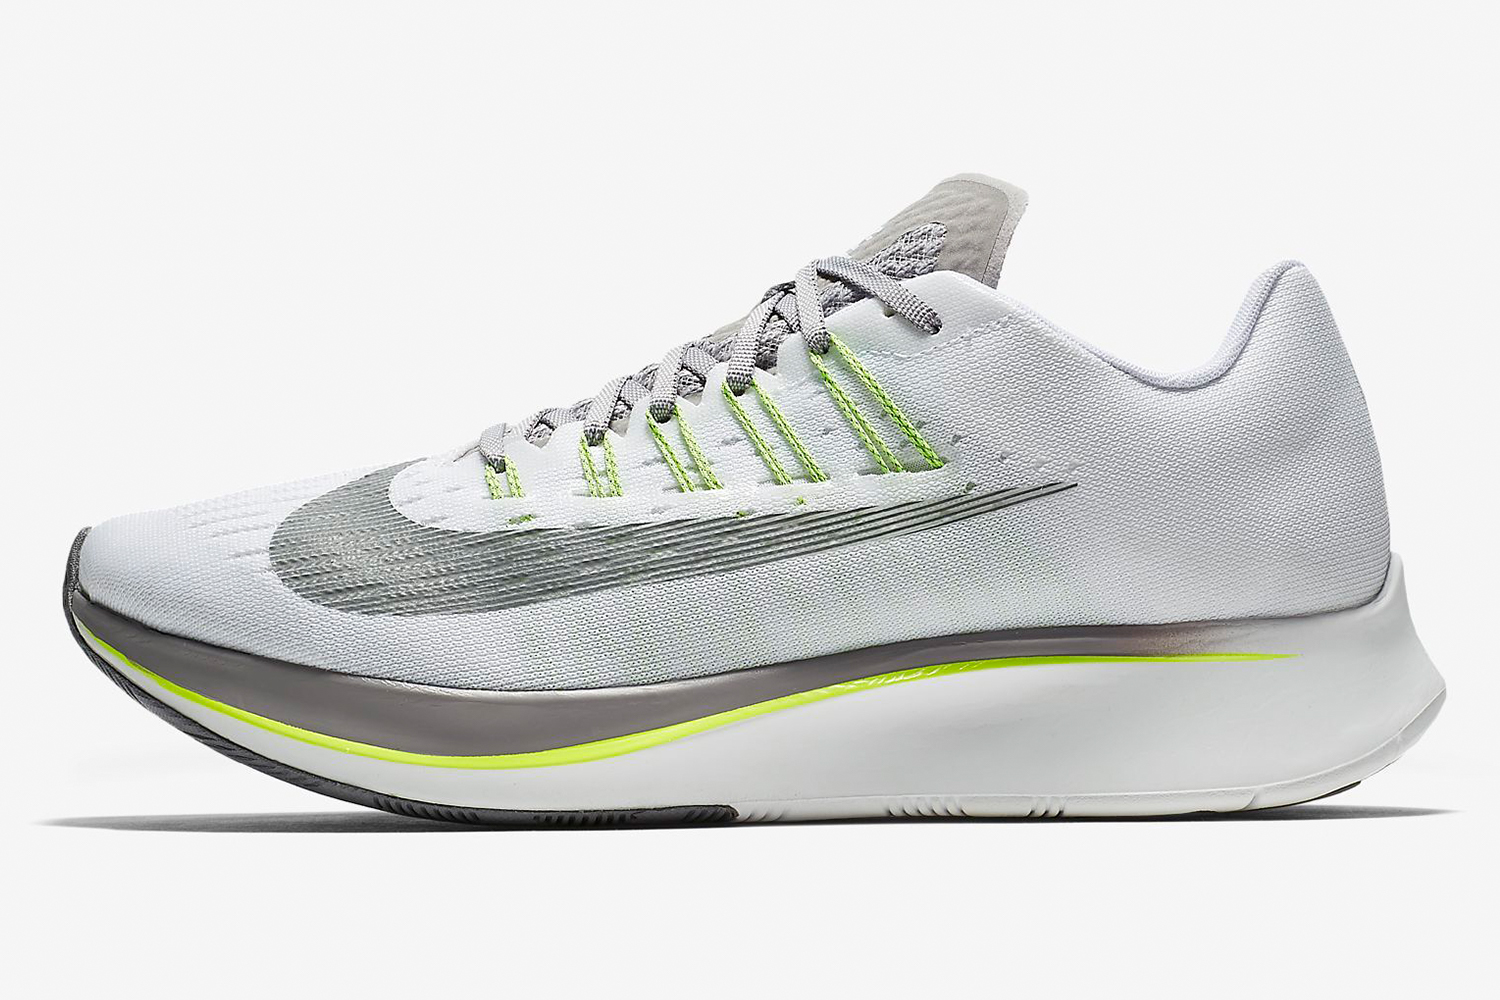 Take $70 Off the Race-Ready Nike Zoom 